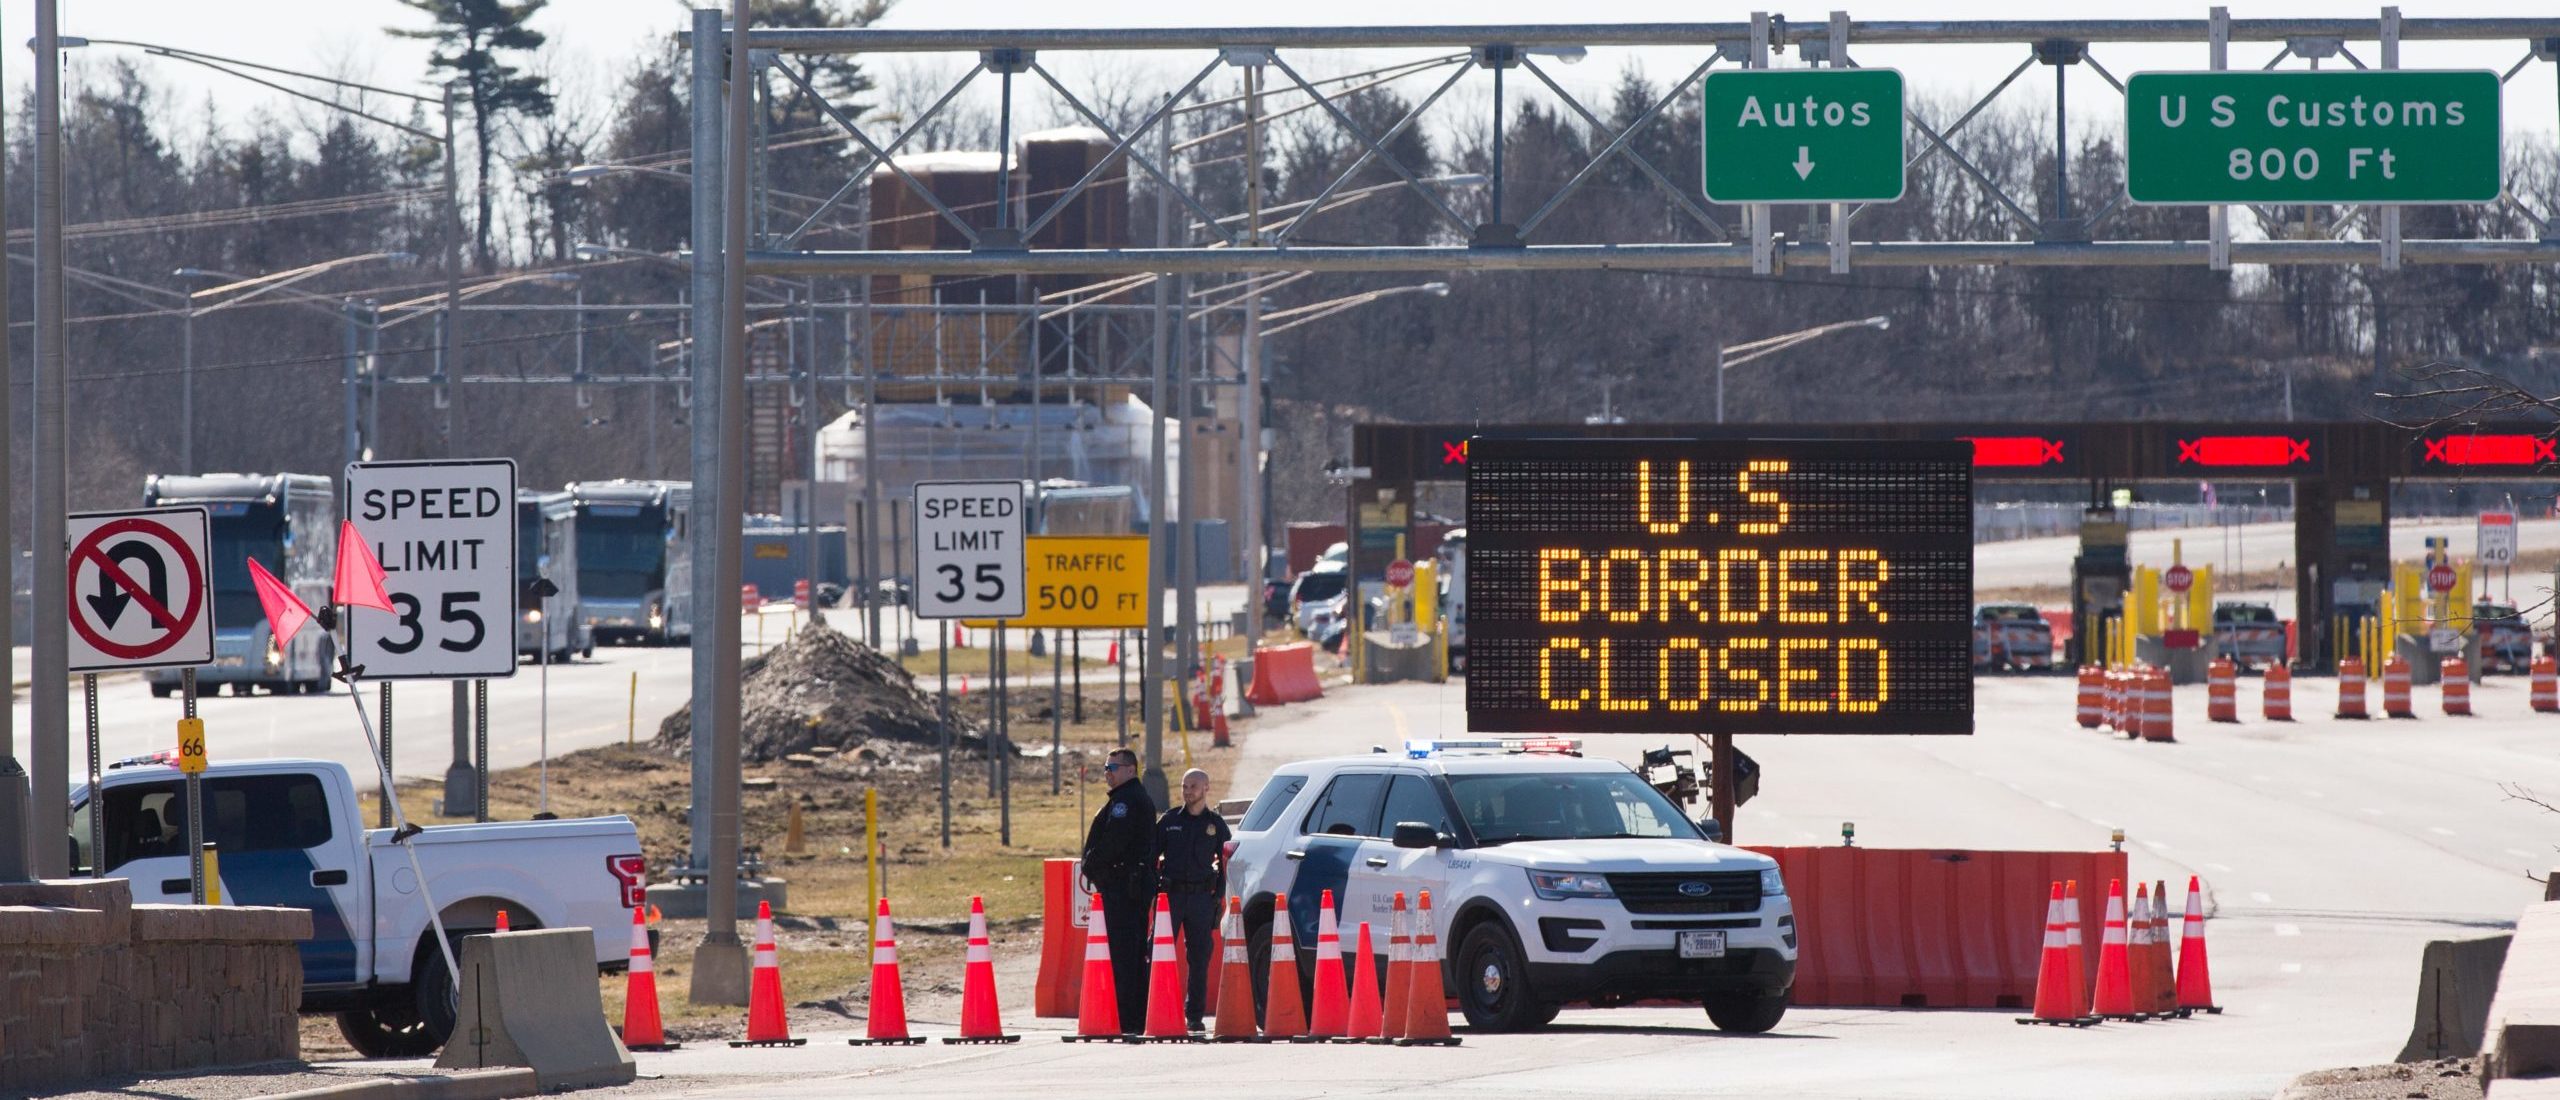 TOPSHOT - US Customs officers stand beside a sign saying that the US border is closed at the US/Canada border in Lansdowne, Ontario, on March 22, 2020. - The United States agreed with Mexico and Canada to restrict non-essential travel because of the coronavirus, COVID-19, outbreak and is planning to repatriate undocumented immigrants arriving from those countries. (Photo by Lars Hagberg / AFP) (Photo by LARS HAGBERG/AFP via Getty Images)